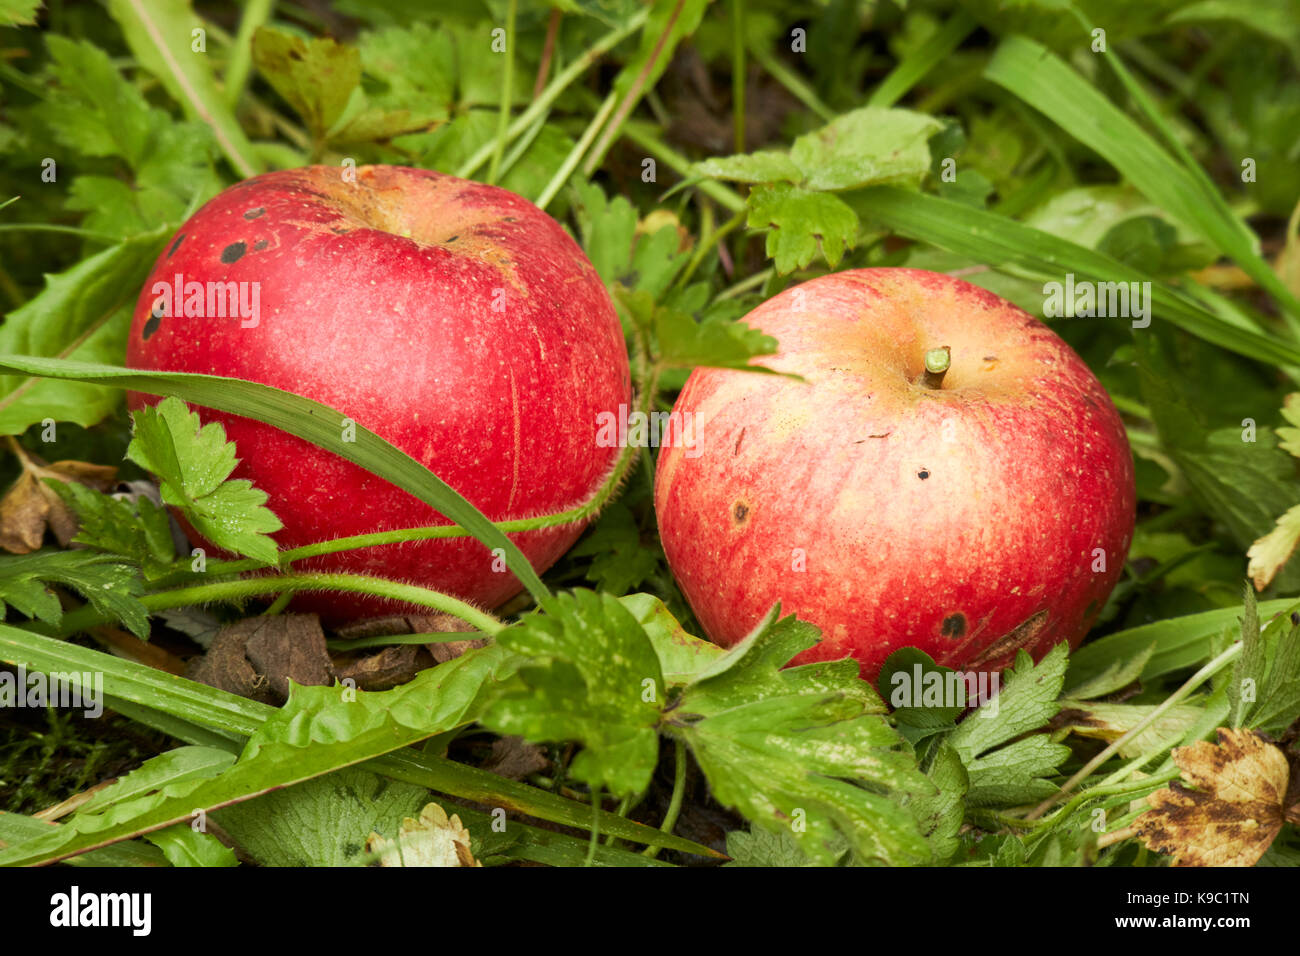 wind fallen home grown discovery apples in a garden in the uk Stock Photo